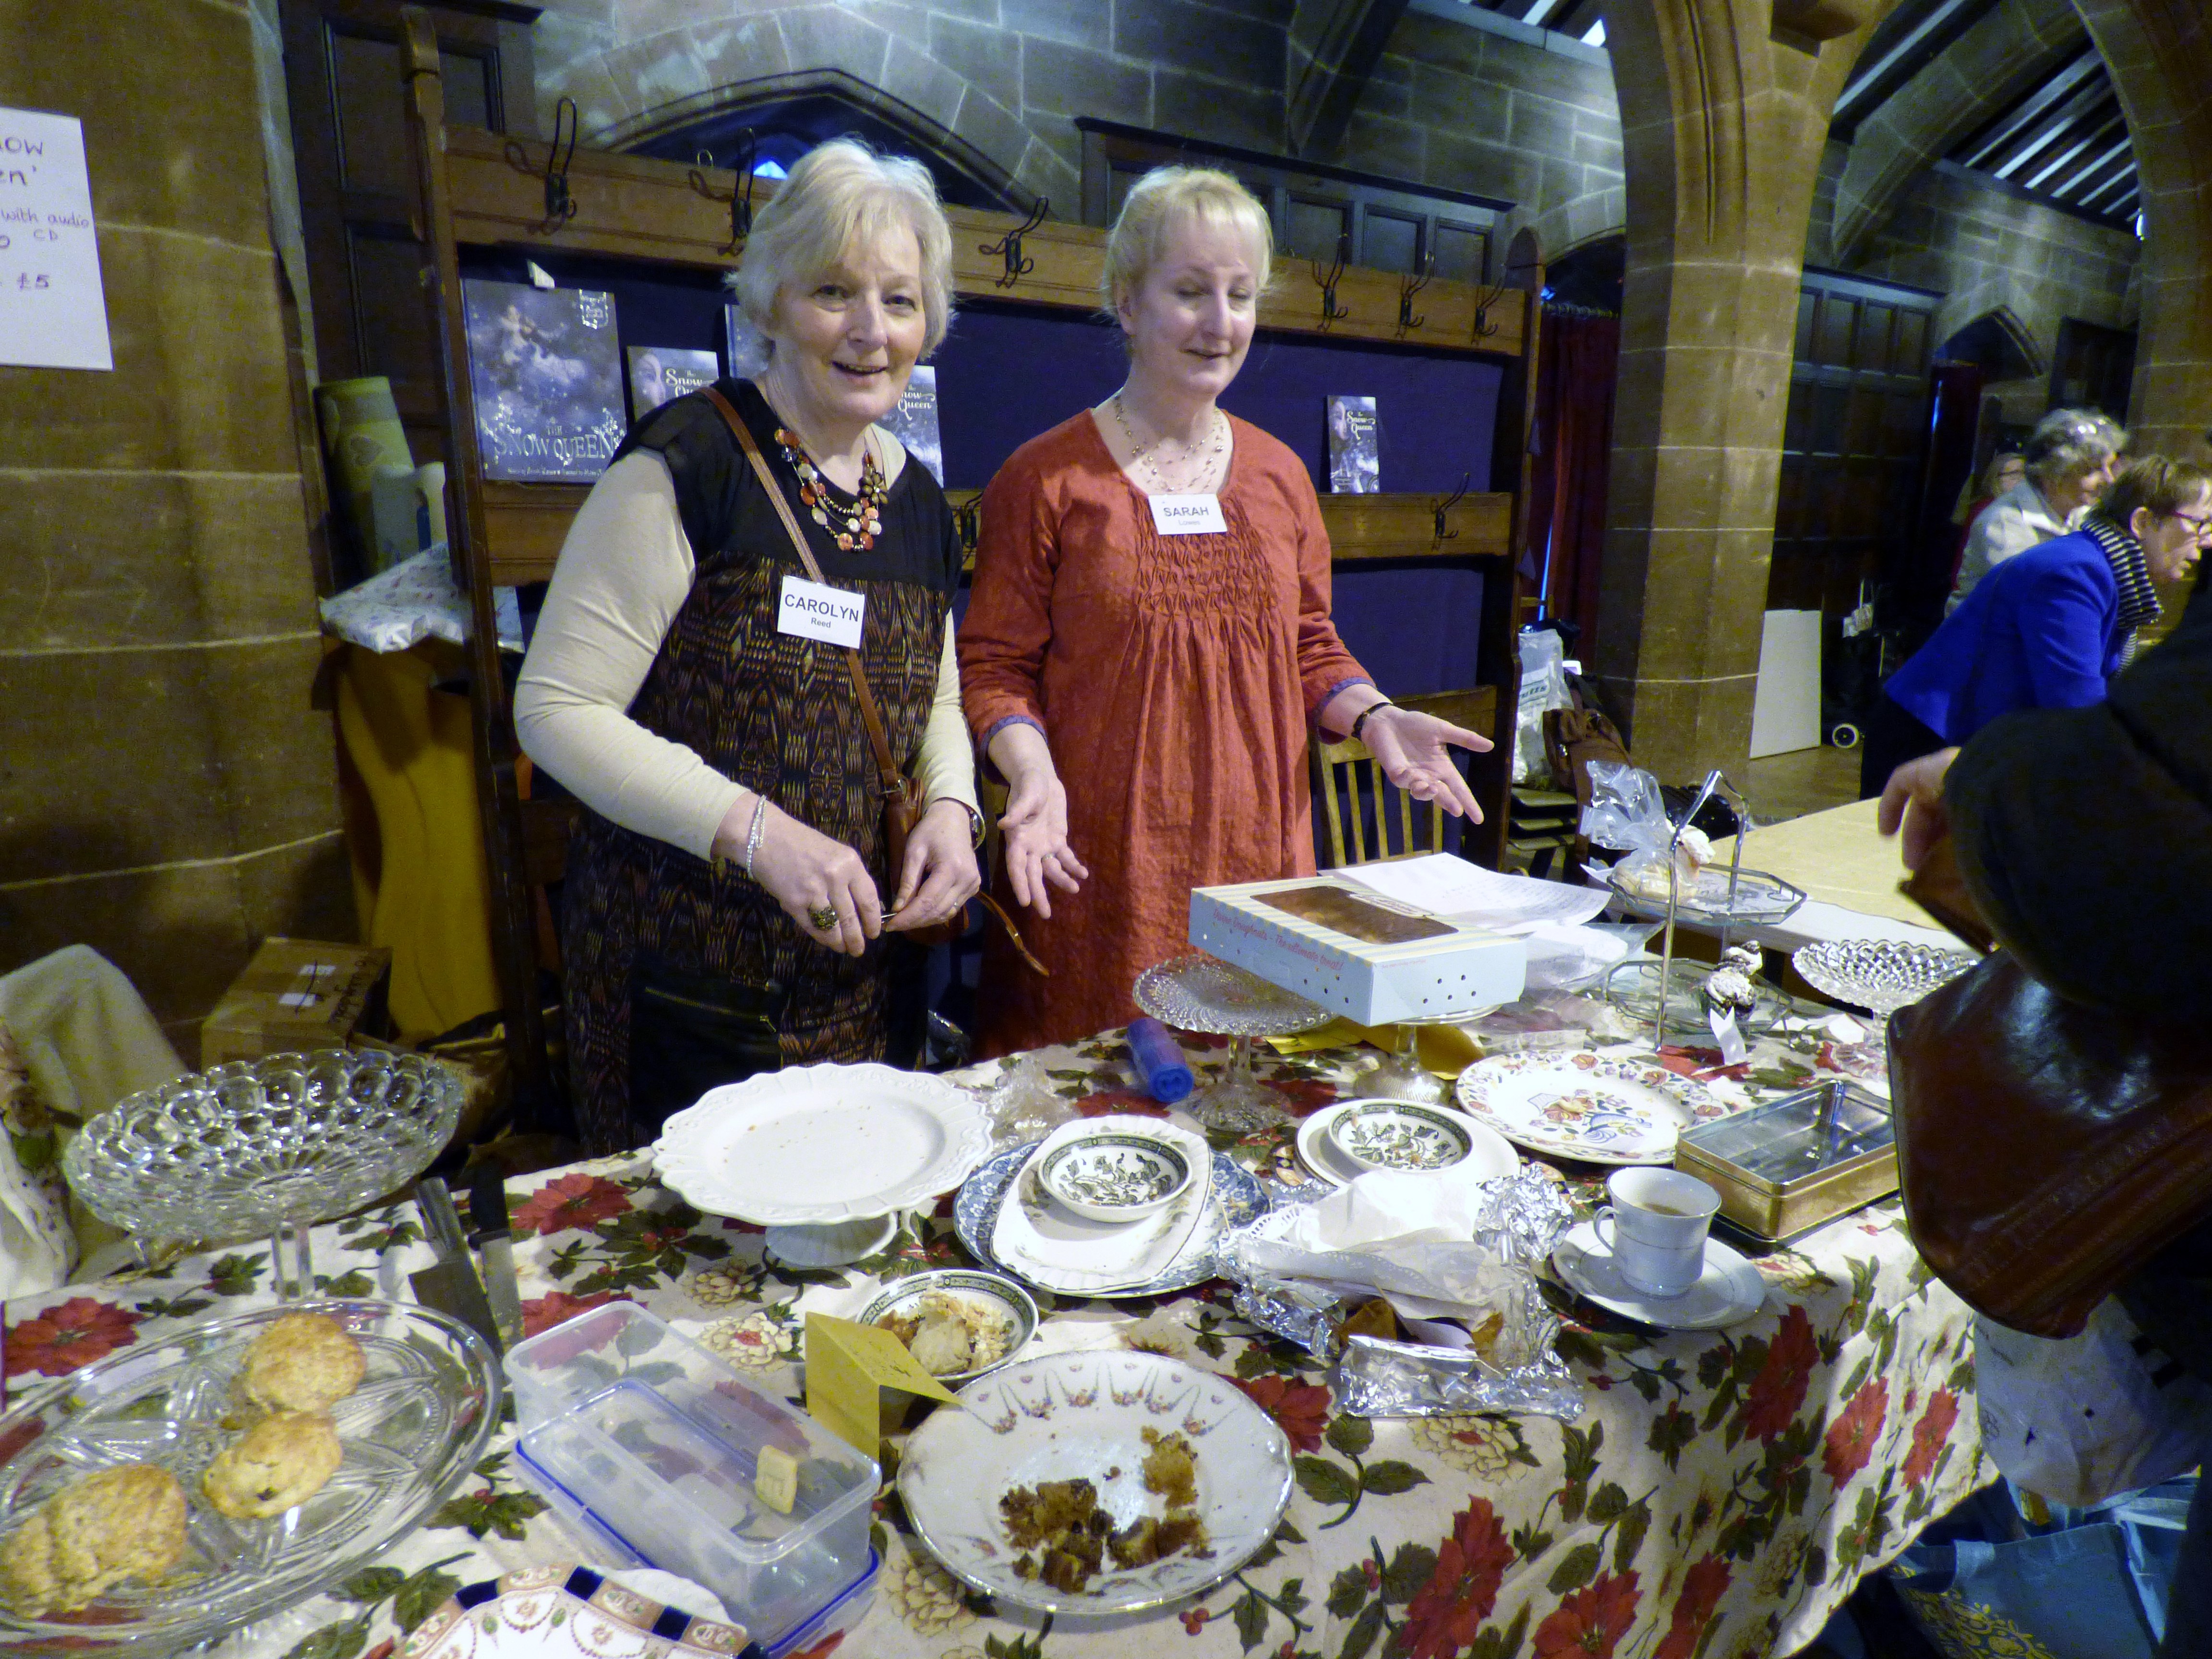 at the end of the day the Cake Stall has sold virtually everything- the cakes were all delicious!